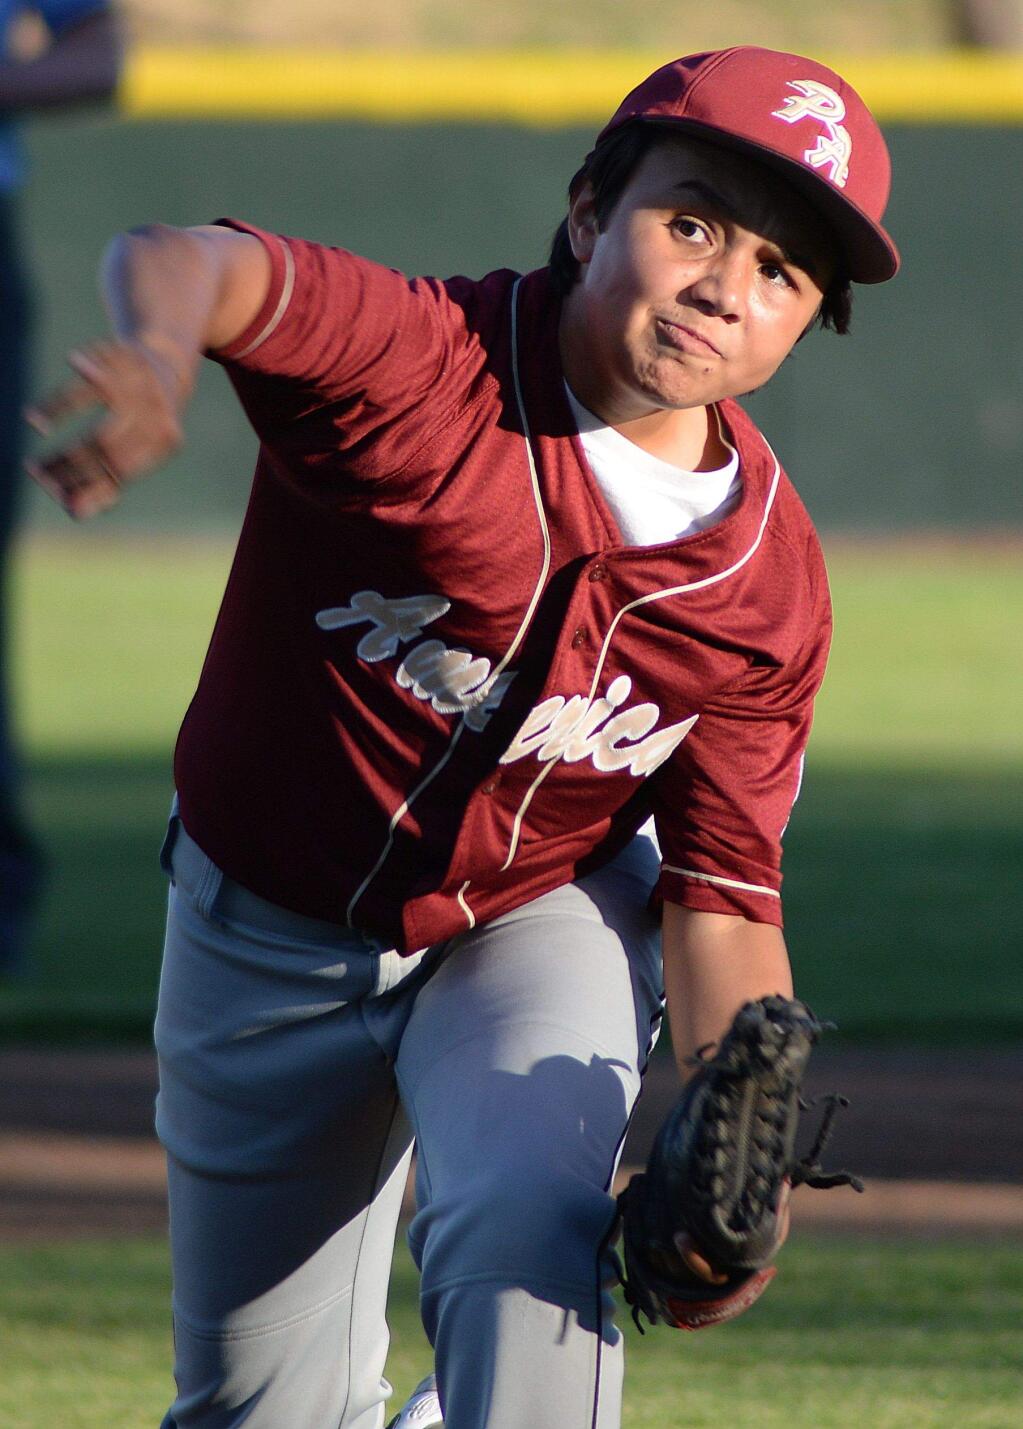 SUMNER FOWLER/FOR THE ARGUS-COURIERUnique Insurance's Jacob Trujillo will next pitch for the Petaluma American Little League All-Star team.